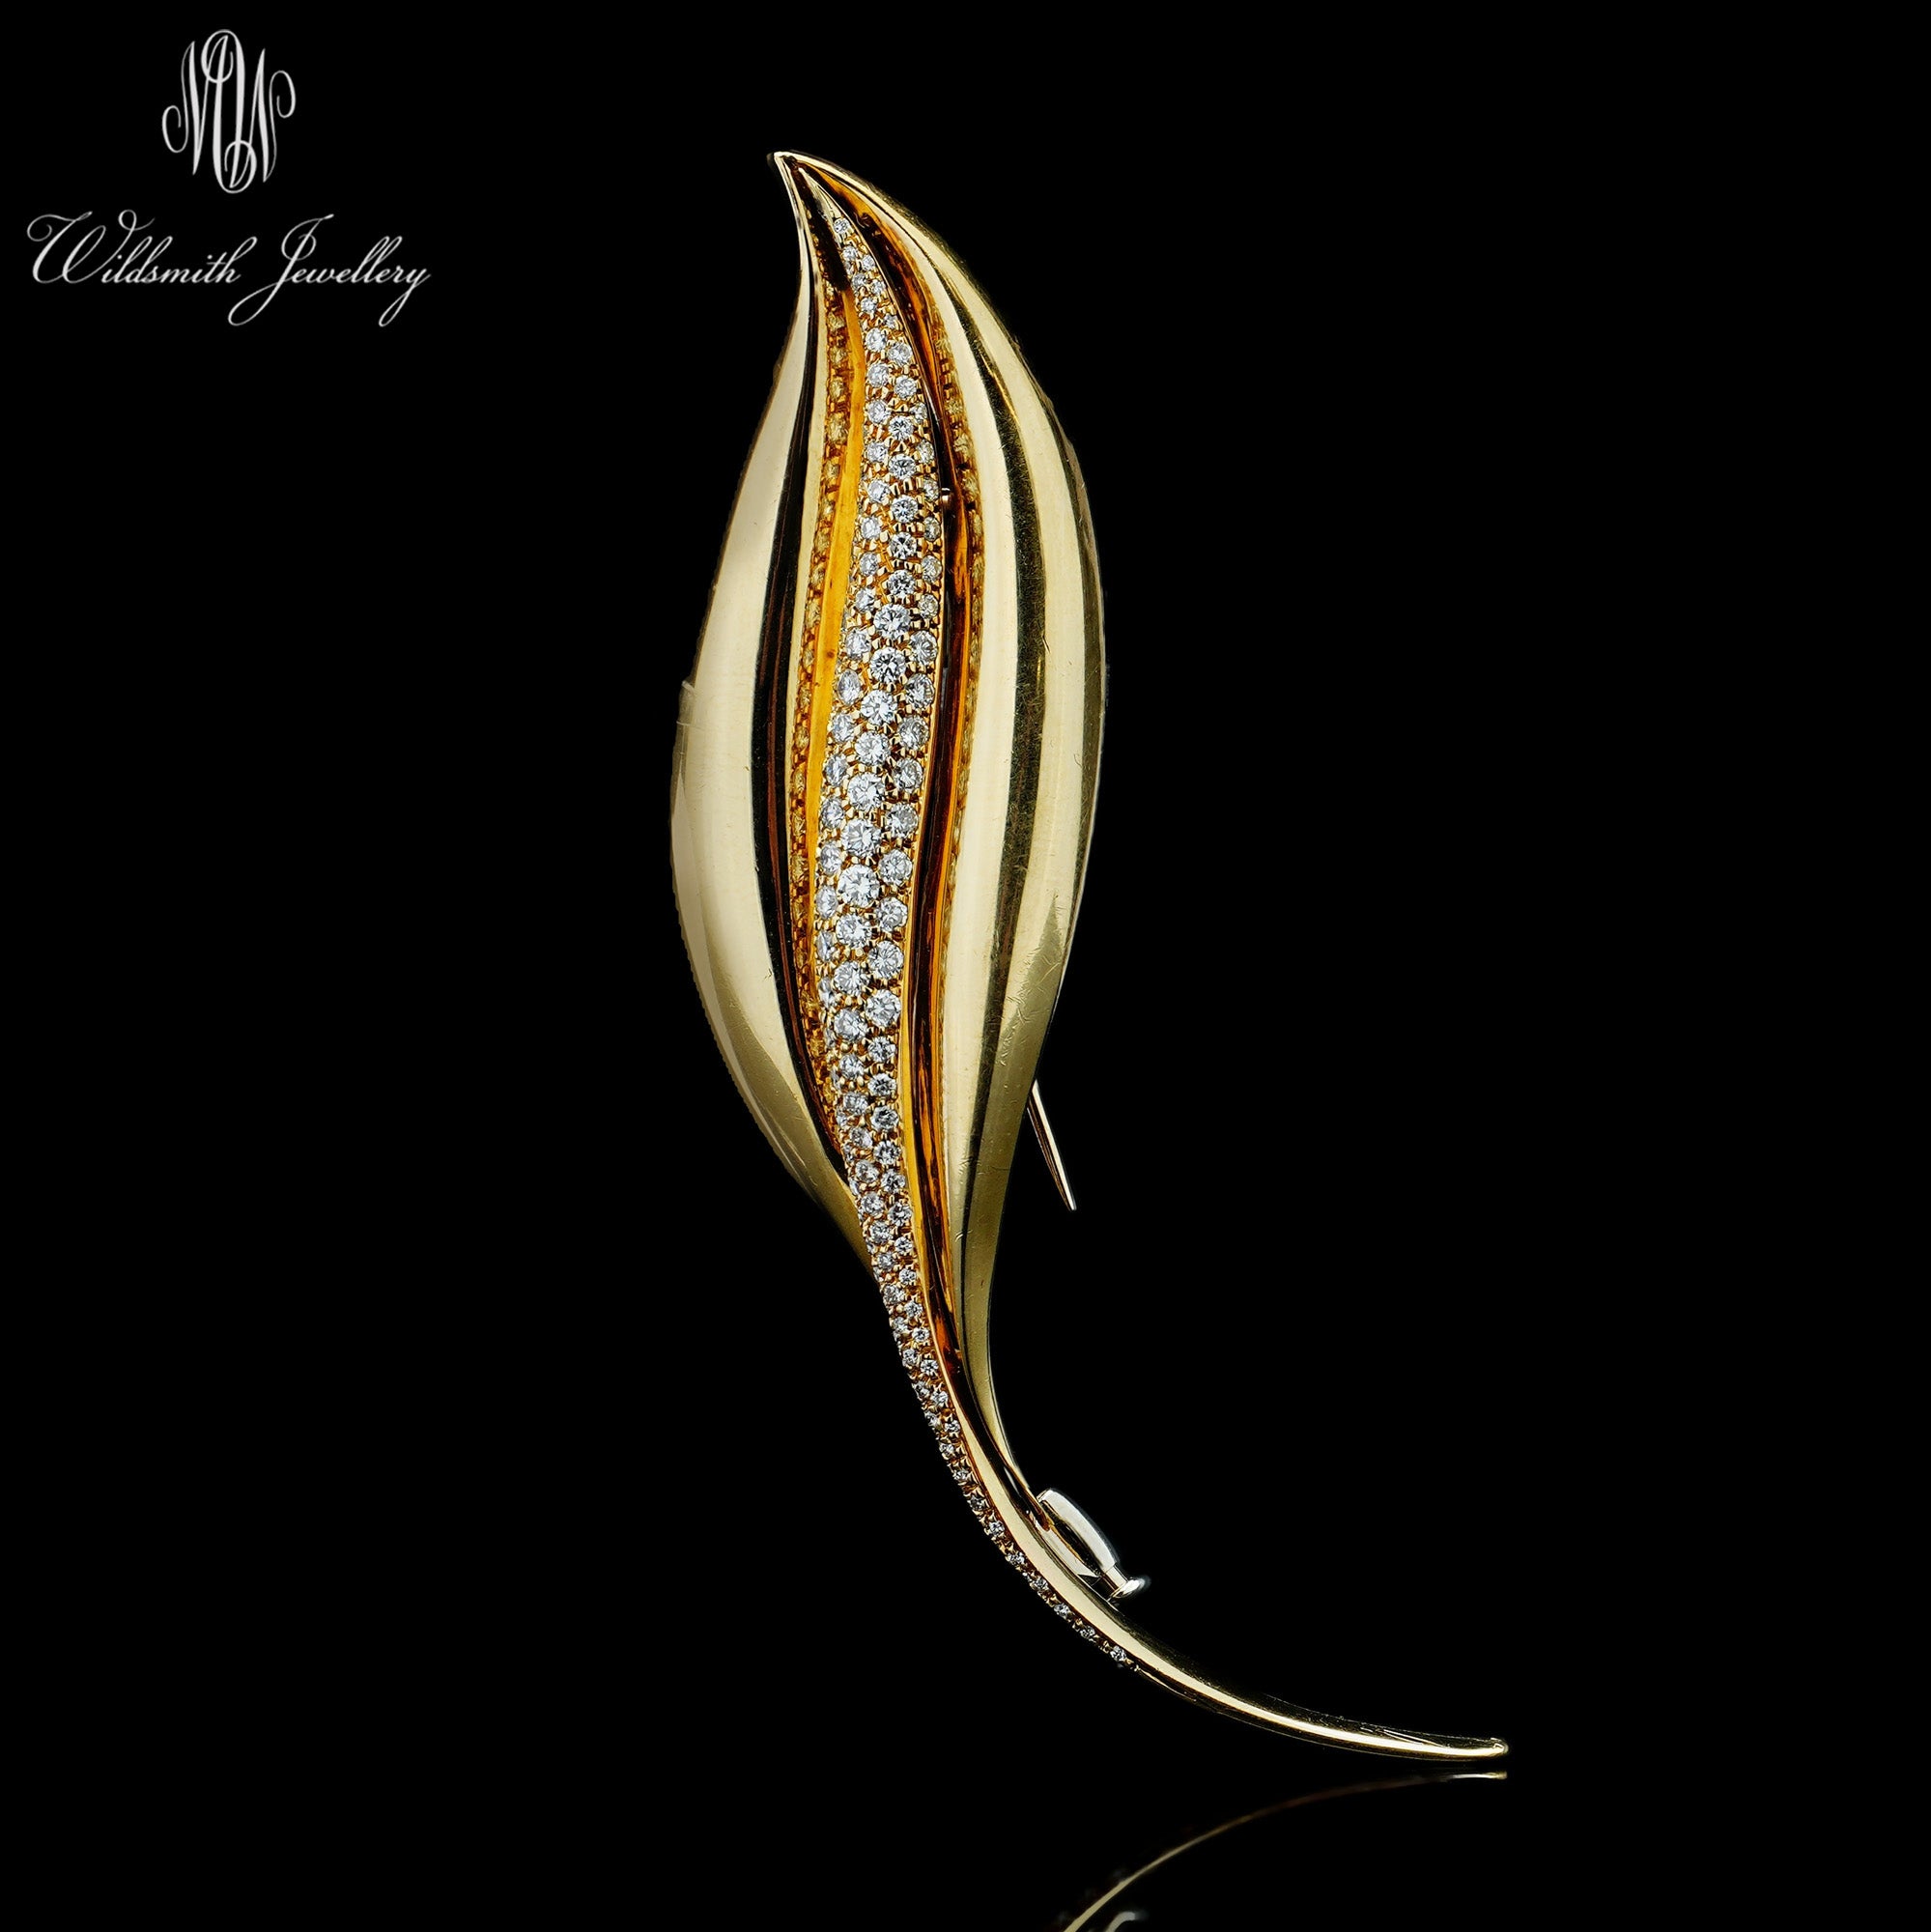 18ct Gold & Diamond Lily Brooch - Wildsmith Jewellery Brooches & Lapel Pins